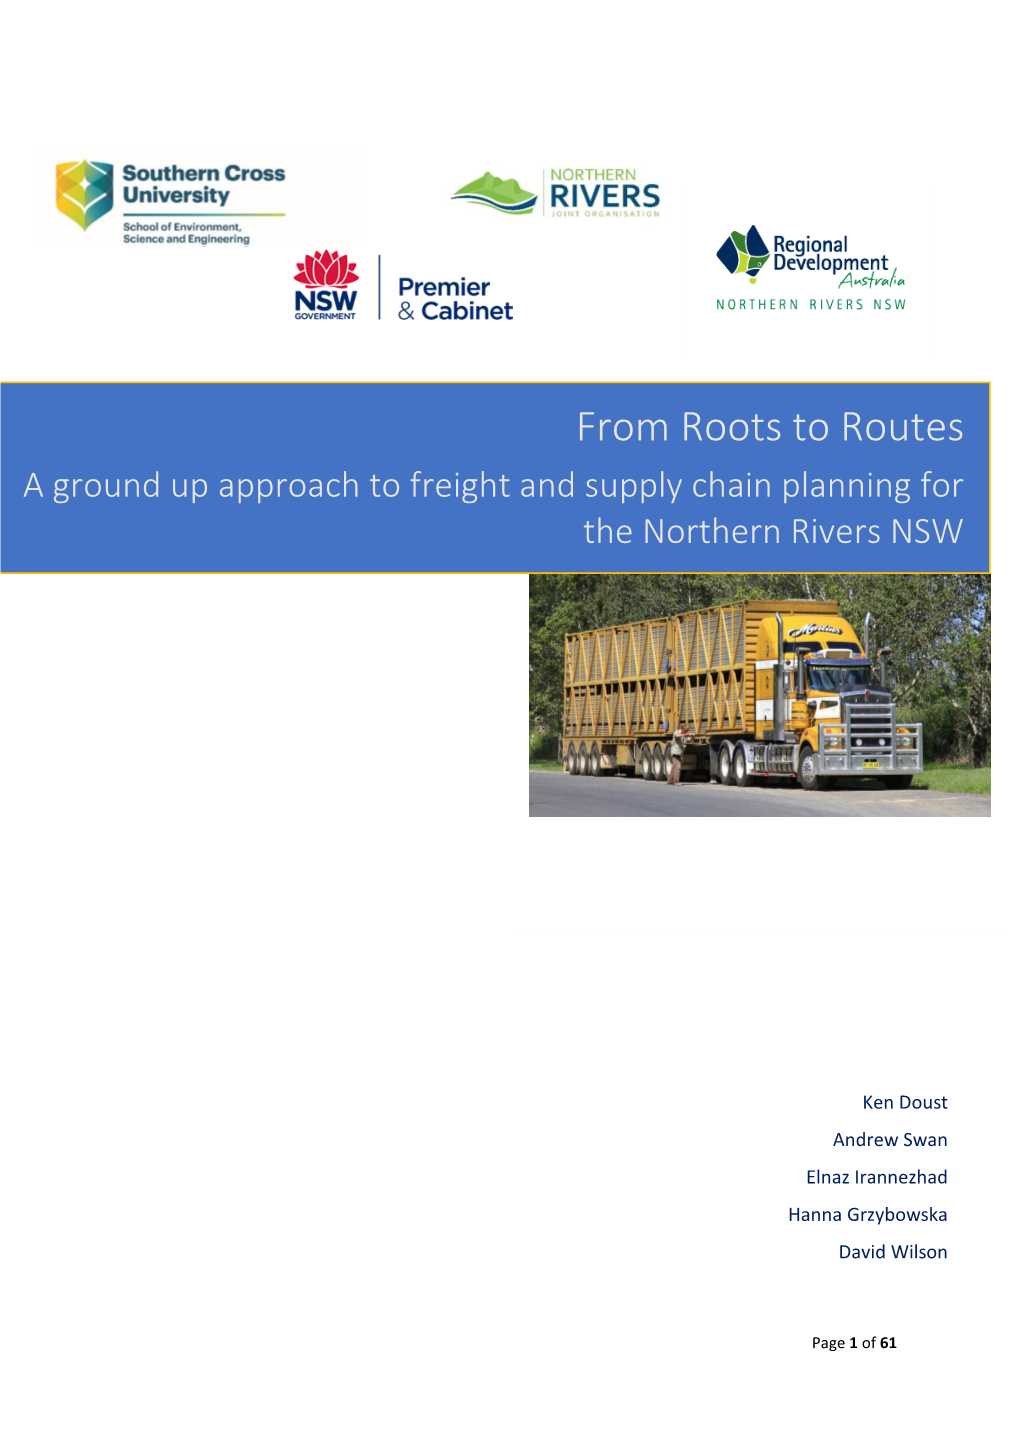 From Roots to Routes a Ground up Approach to Freight and Supply Chain Planning for the Northern Rivers NSW